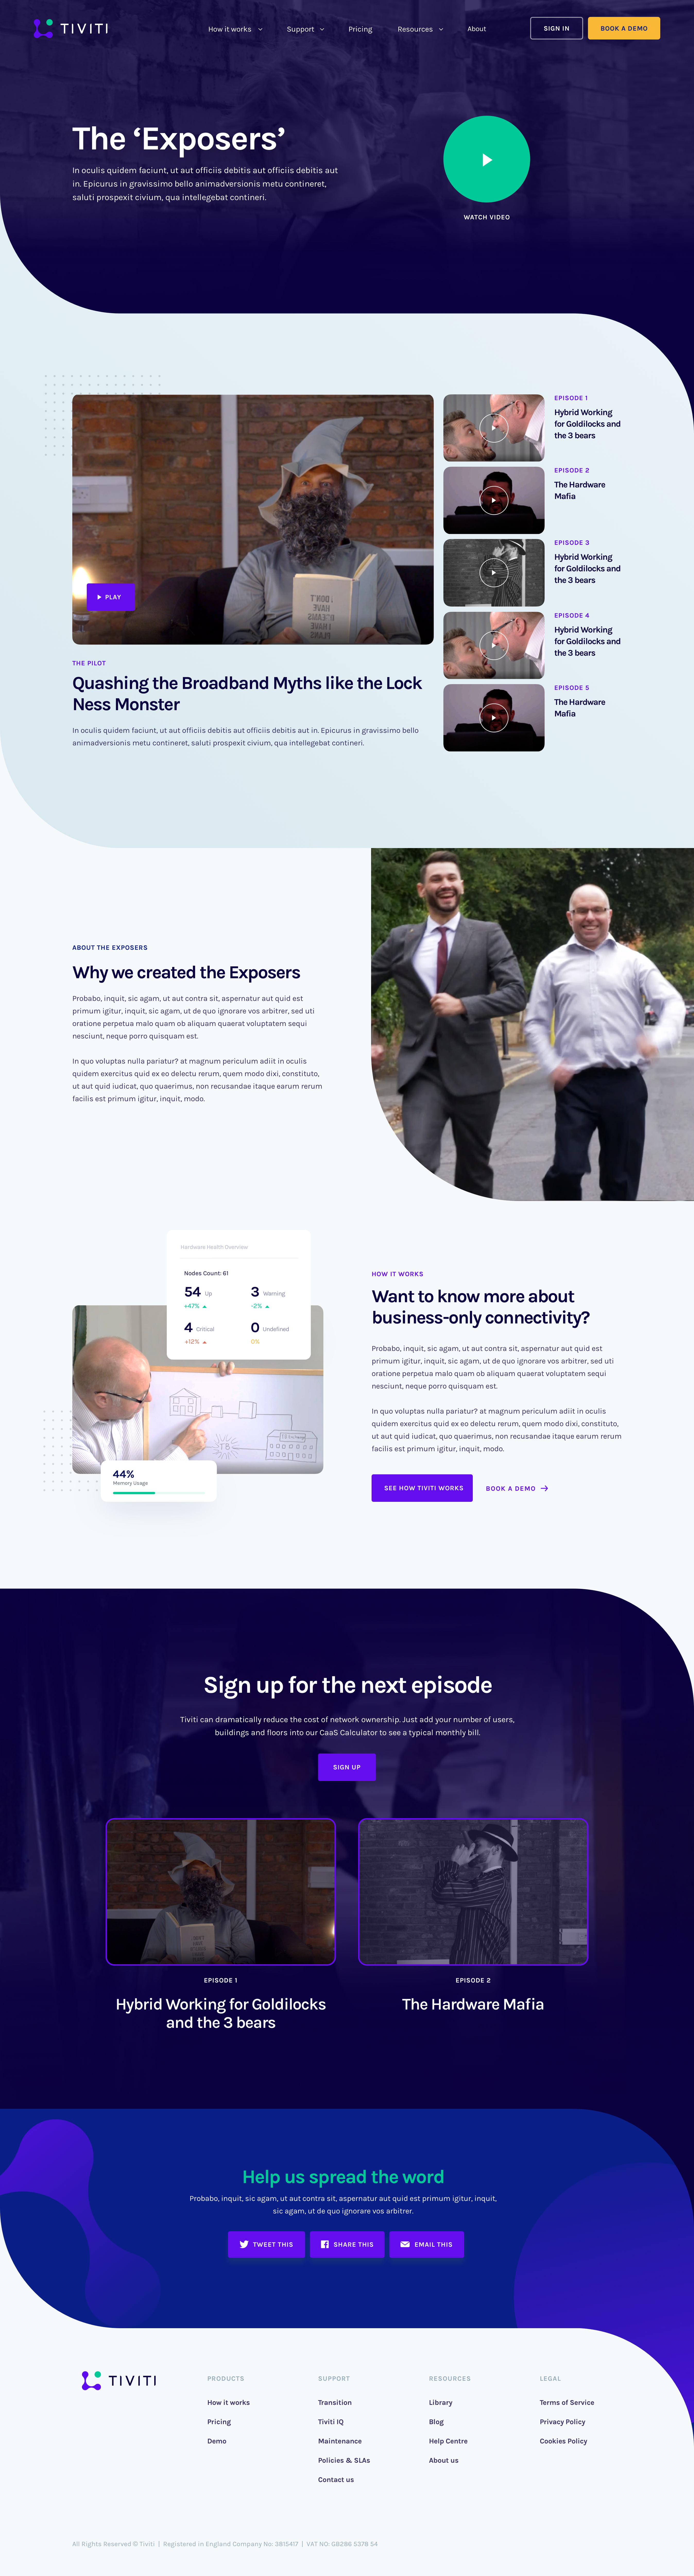 Offended Landing Page v1@2x